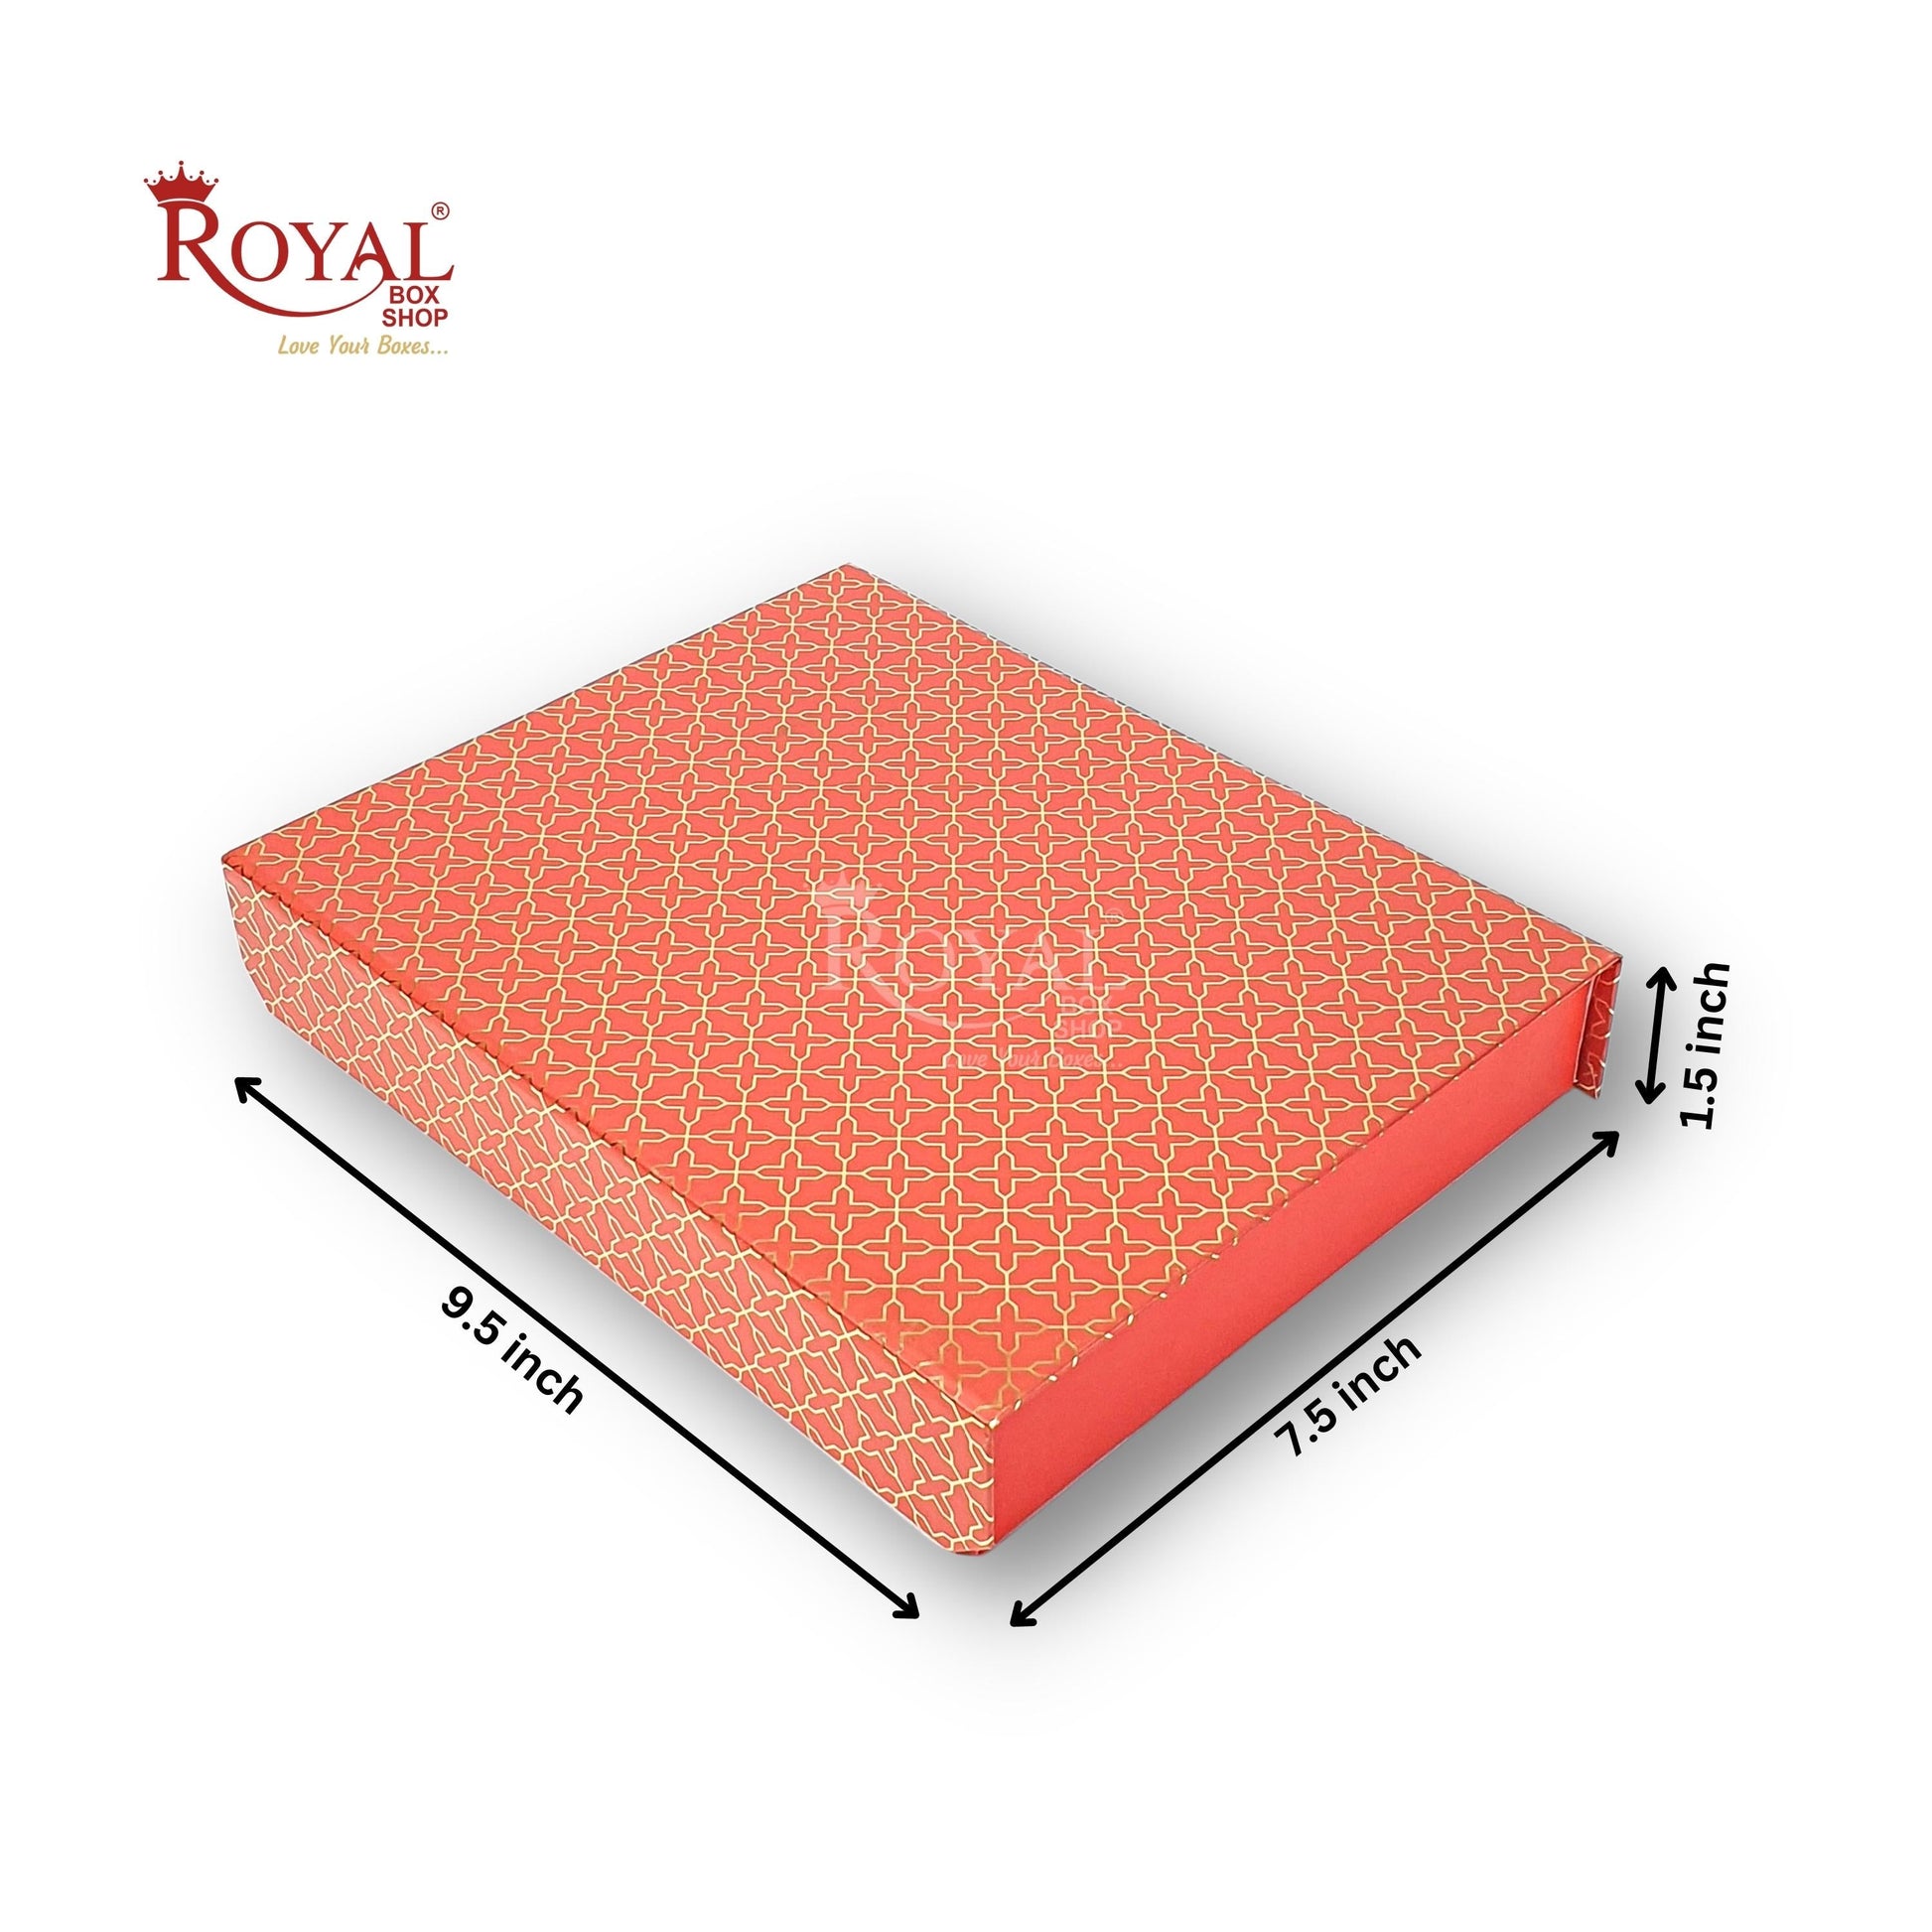 Rigid Chocolate Boxes 20 Cavity With Magnetic Flap I Red with Gold Foiling I 9.5 X 7.5 X 1.5 Inch I Kappa Boxes Royal Box Shop